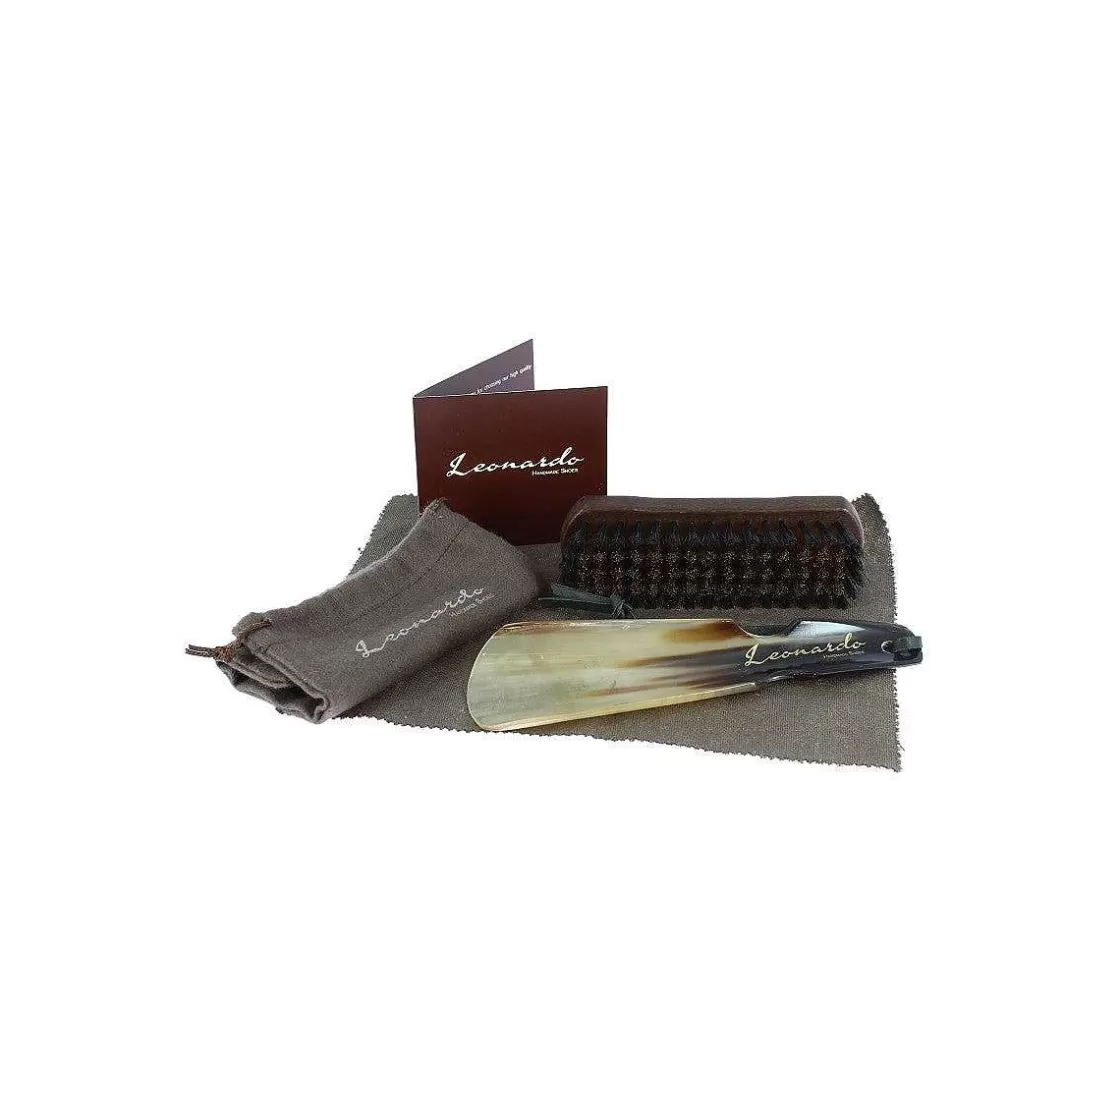 Leonardo Suede Leather Shoe Kit With Shoe Horn And Brush Cheap